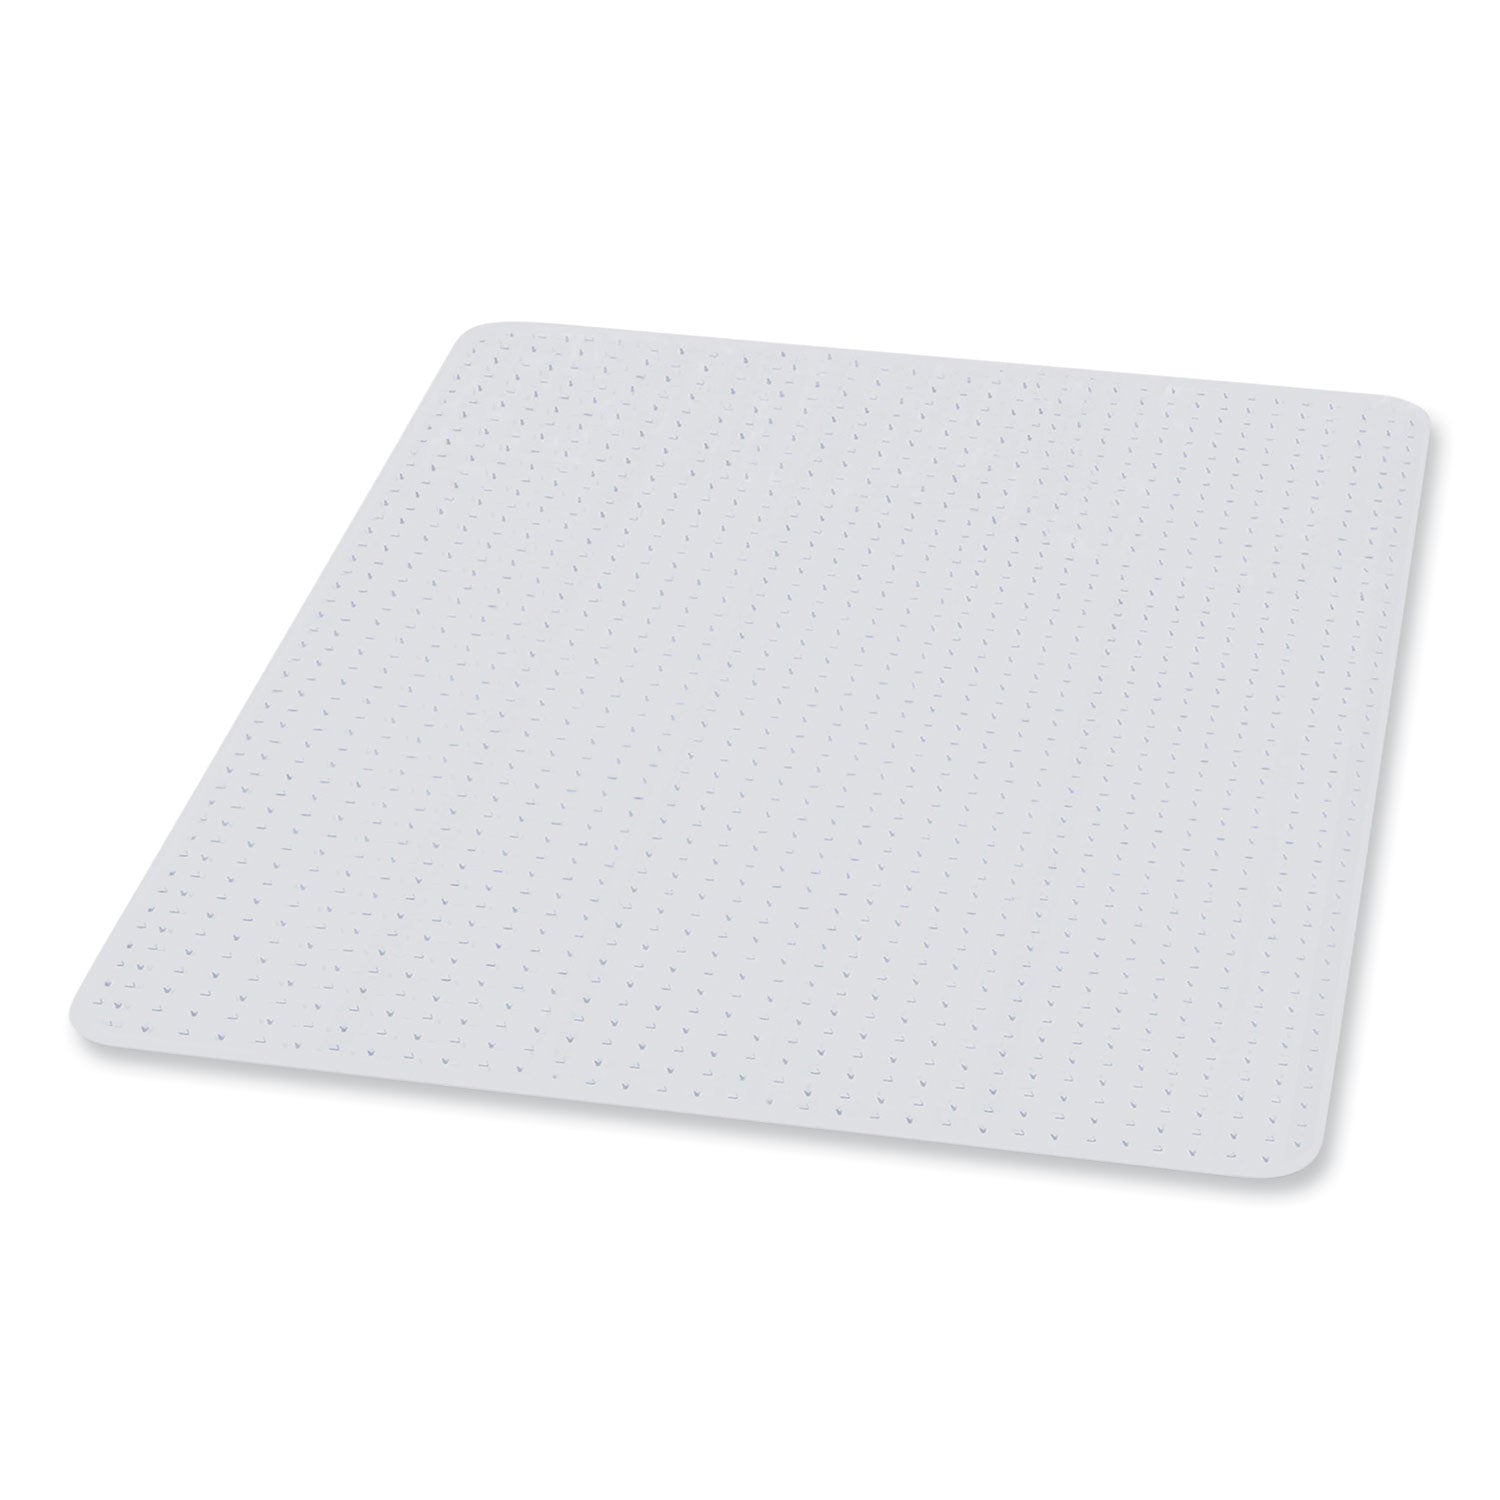 EverLife Chair Mat for Extra High Pile Carpet, Square, 72 x 72, Clear, Ships in 7-10 Business Days - 1